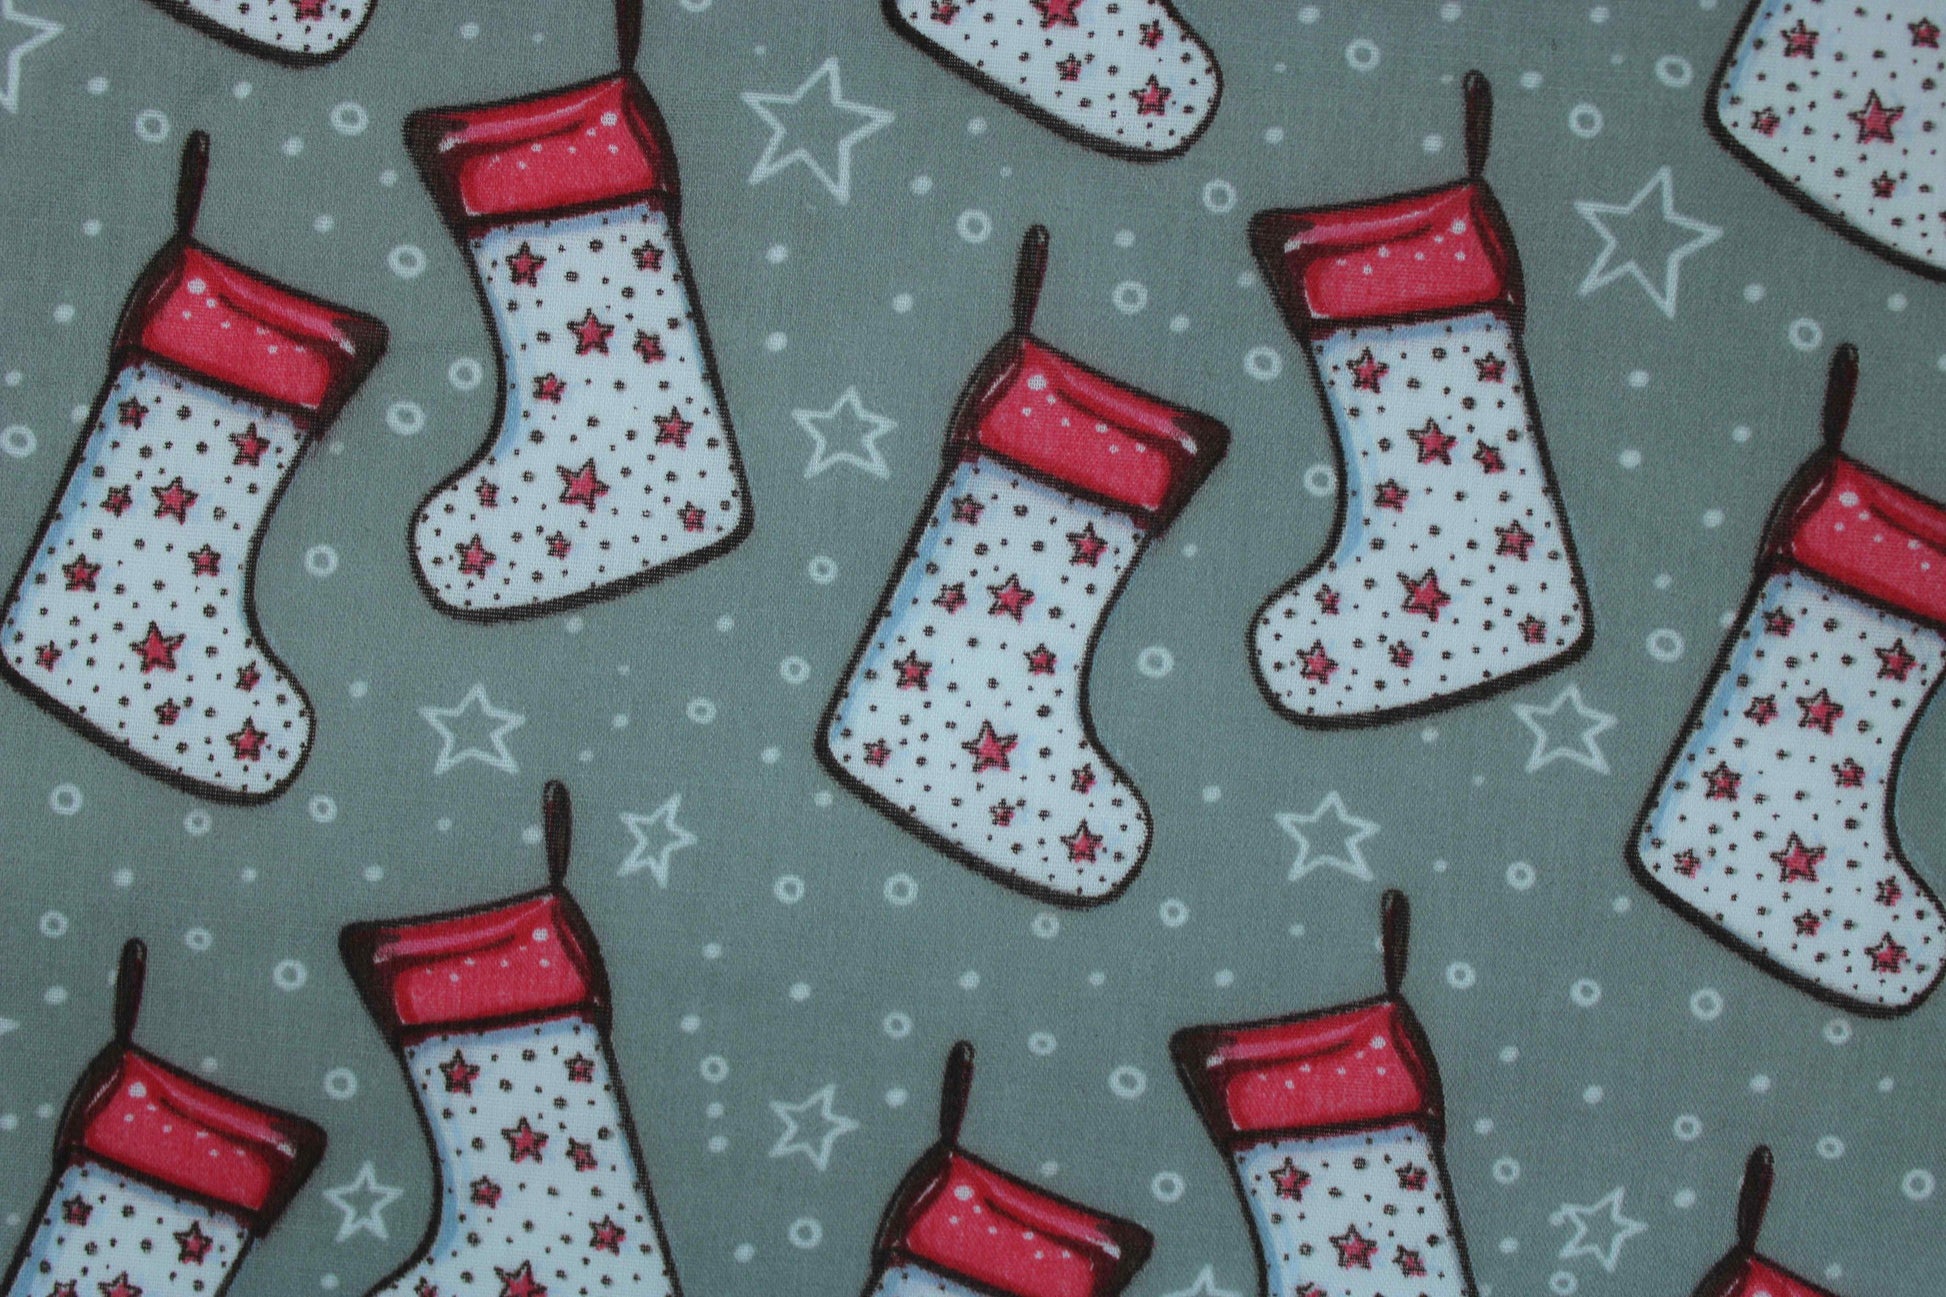 white christmas stocking design on grey fabric with star and dots detail fabric